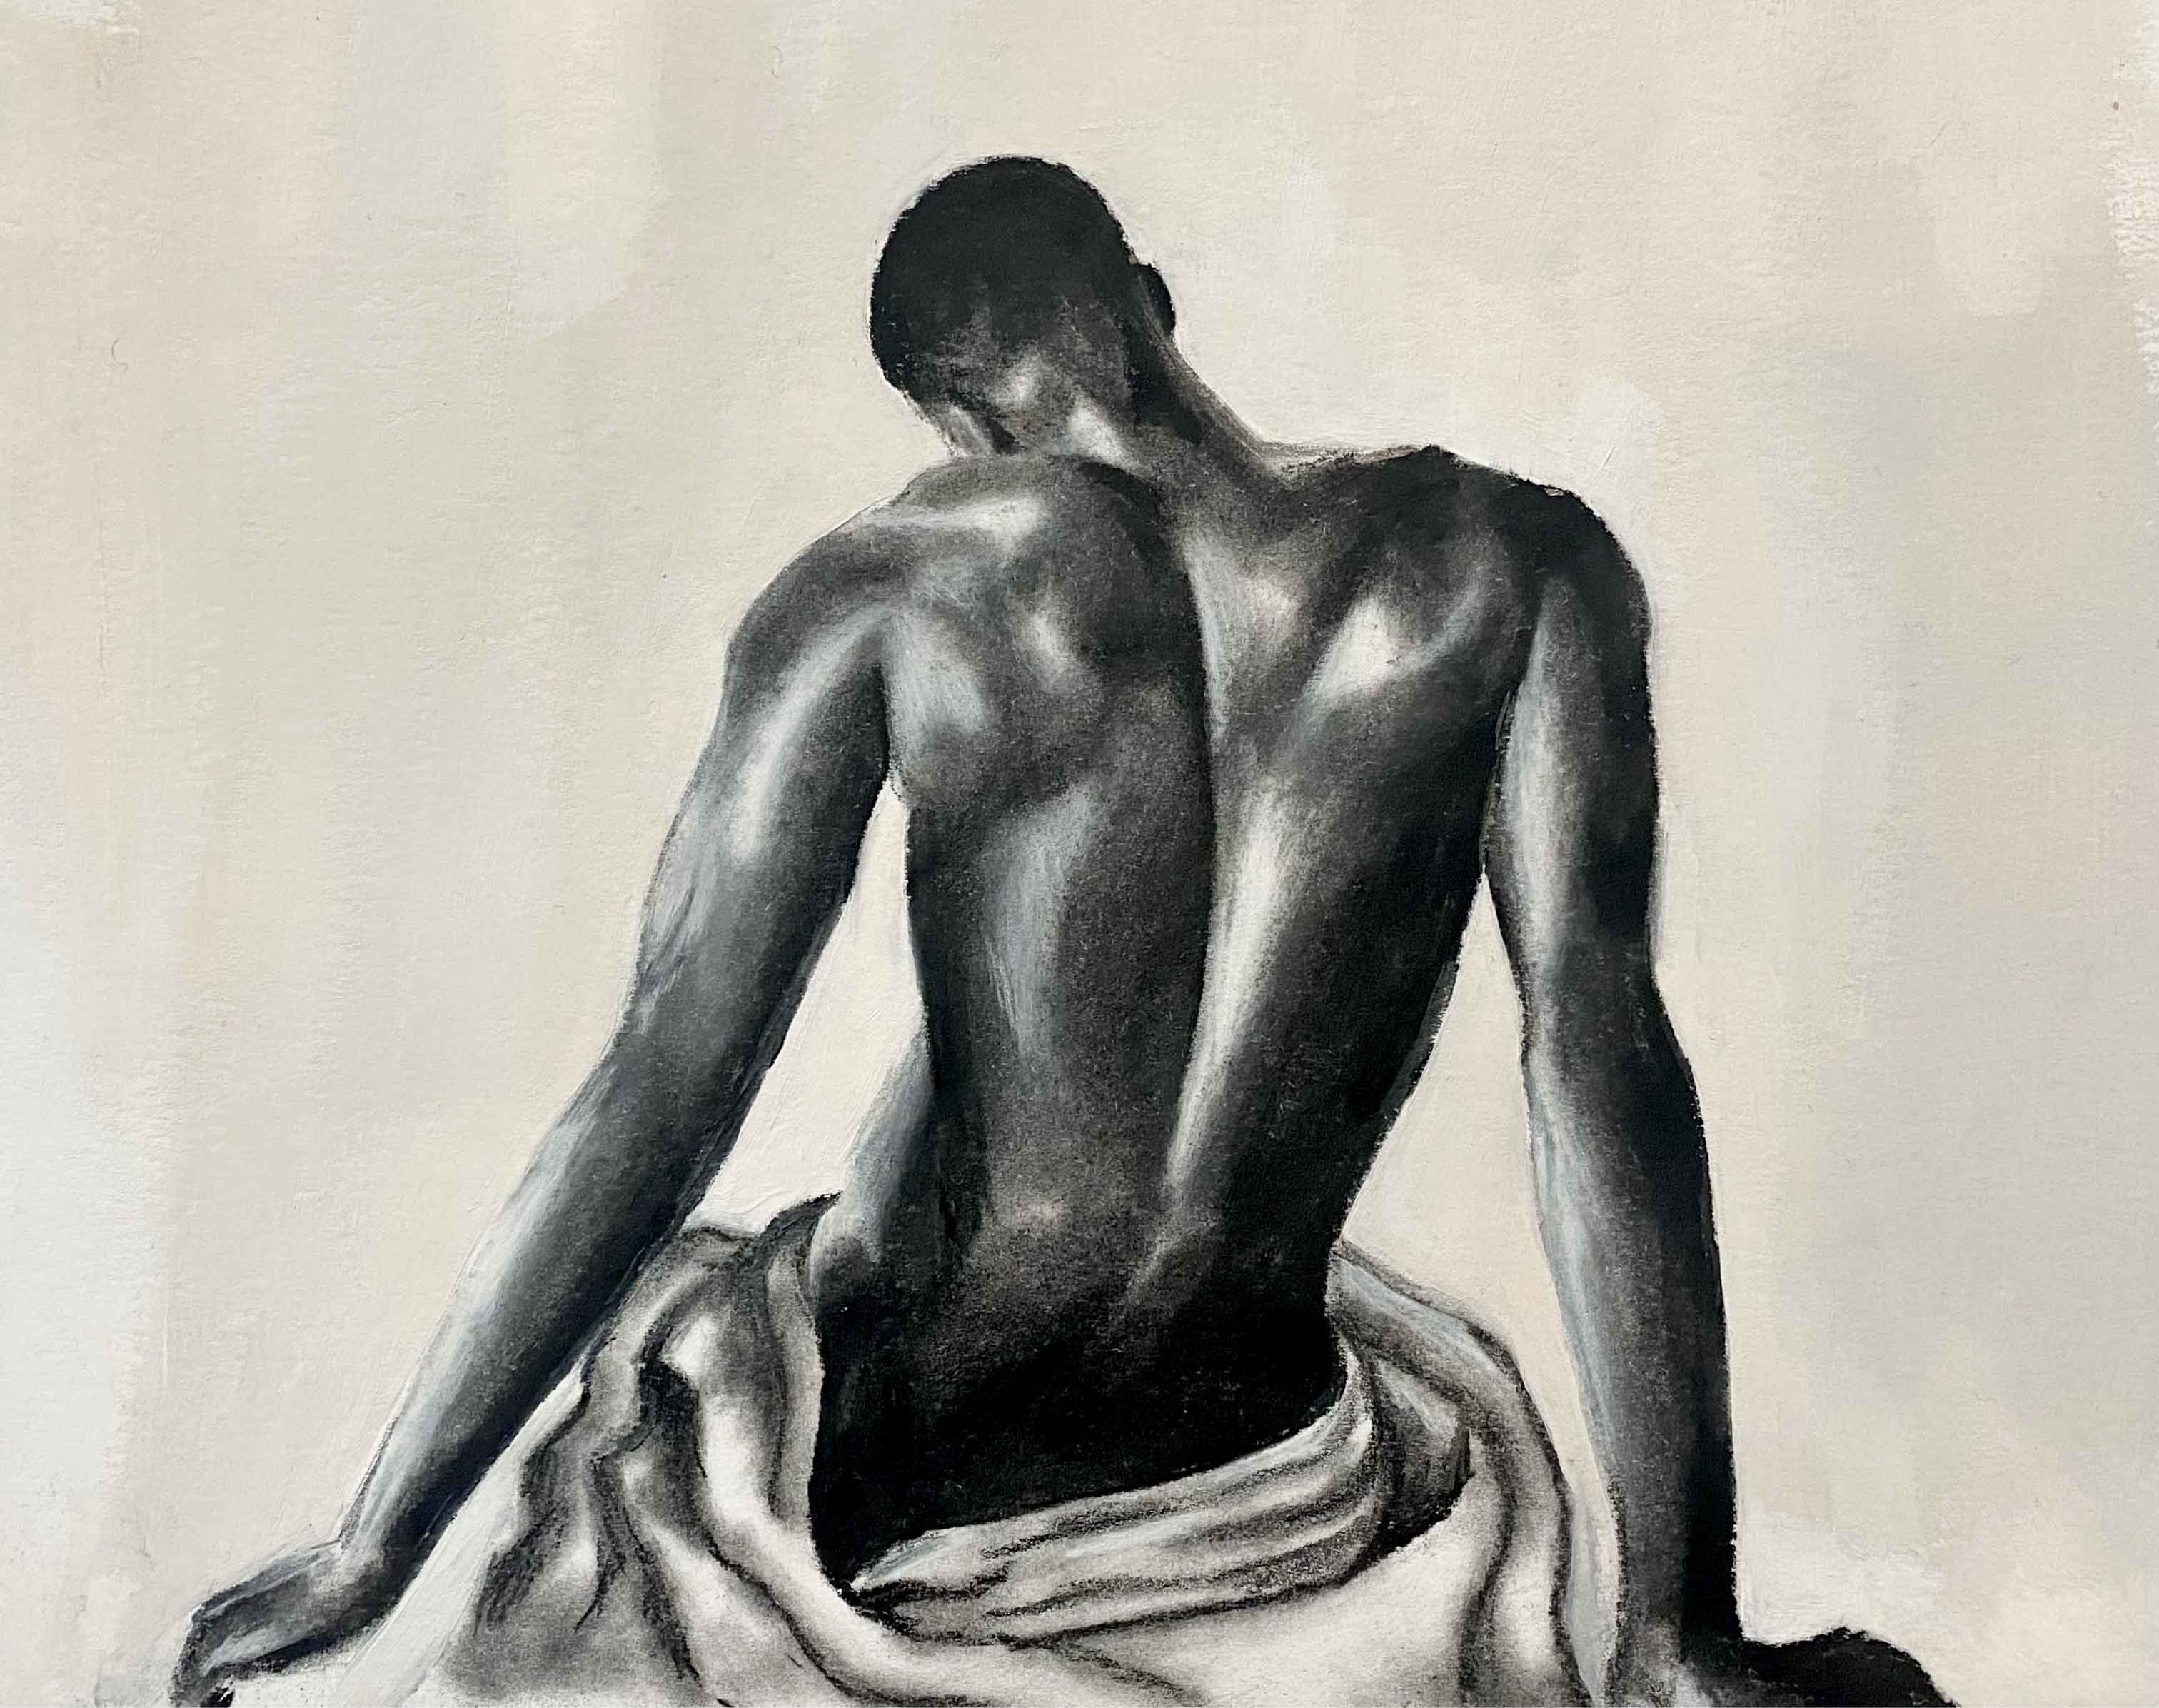 A charcoal drawing of a man's back